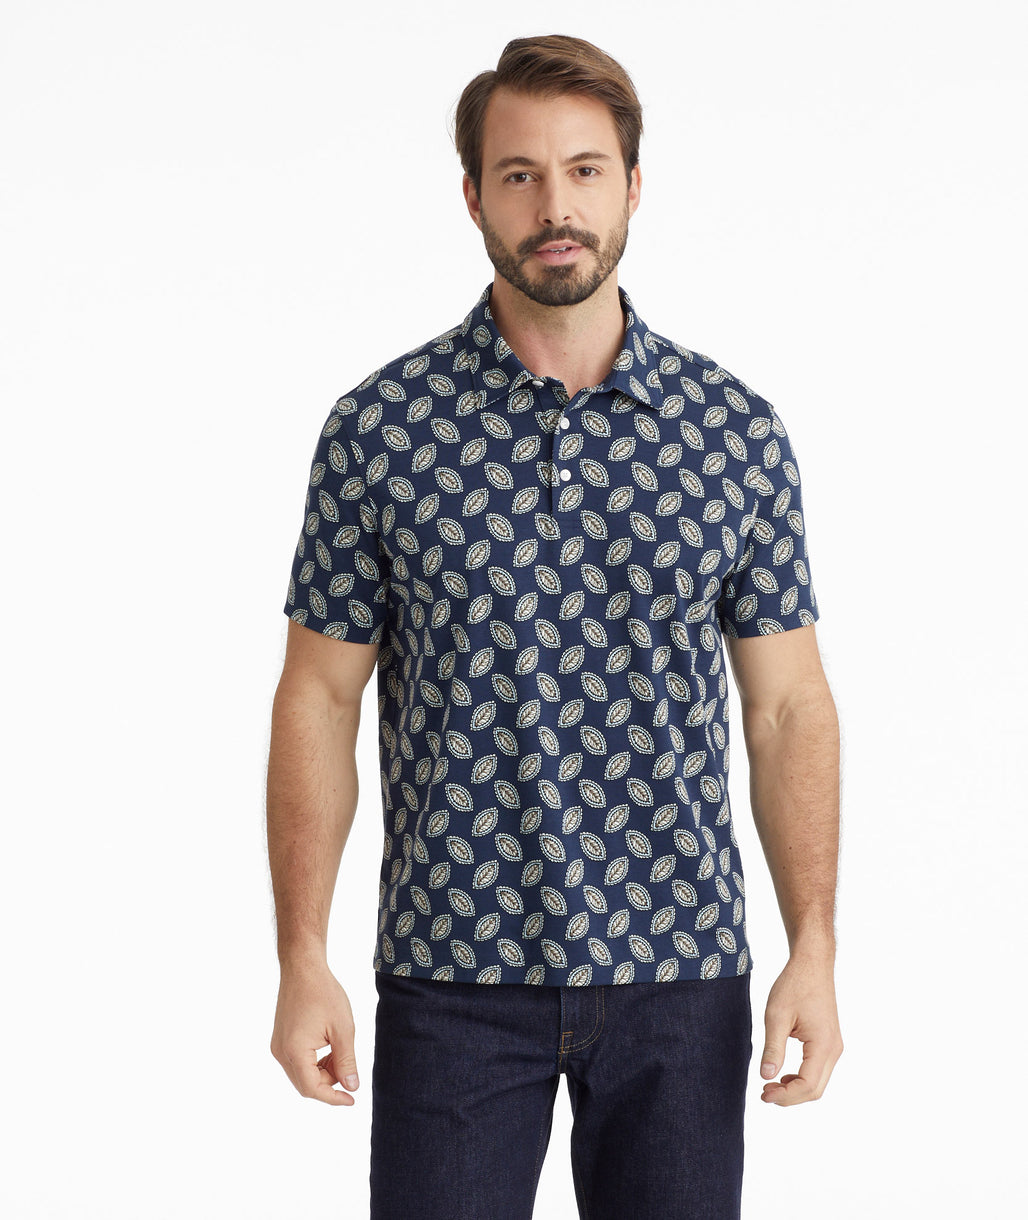 Model wearing a Navy Wrinkle-Free Printed Polo